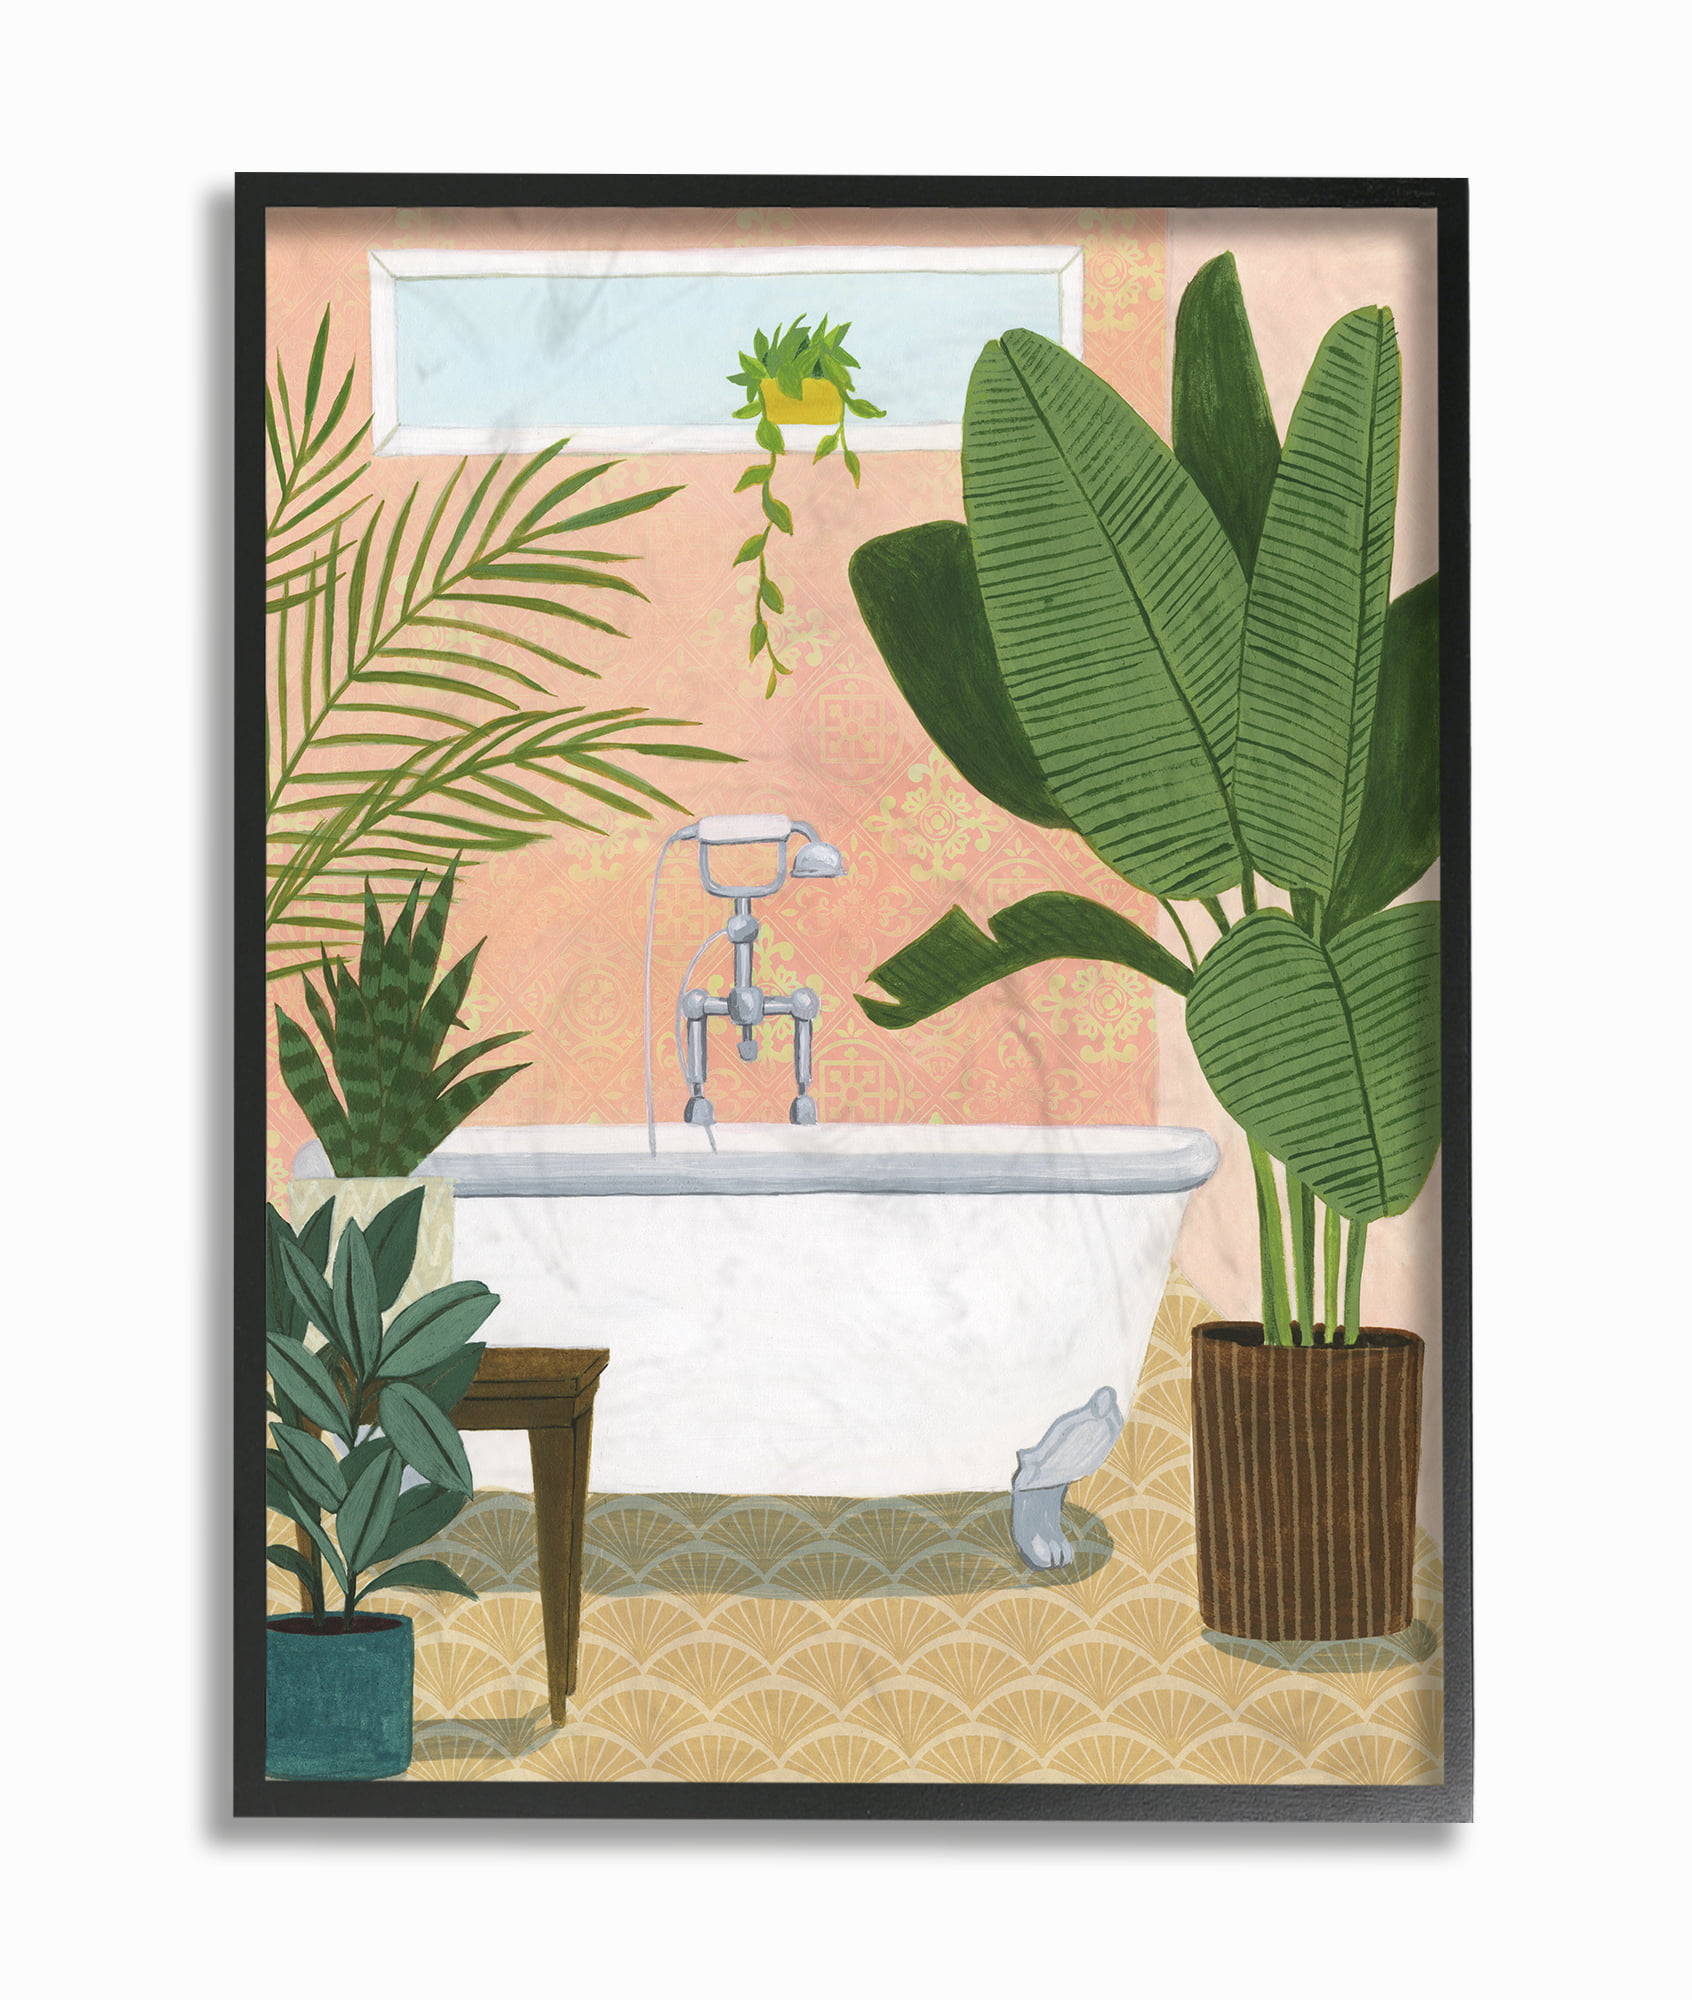 The Stupell Home Decor Collection Boho Plant Scene with Cacti and Succulents in Geometric Pots Watercolor Framed Giclee Texturized Art Multi-Color 16x20 